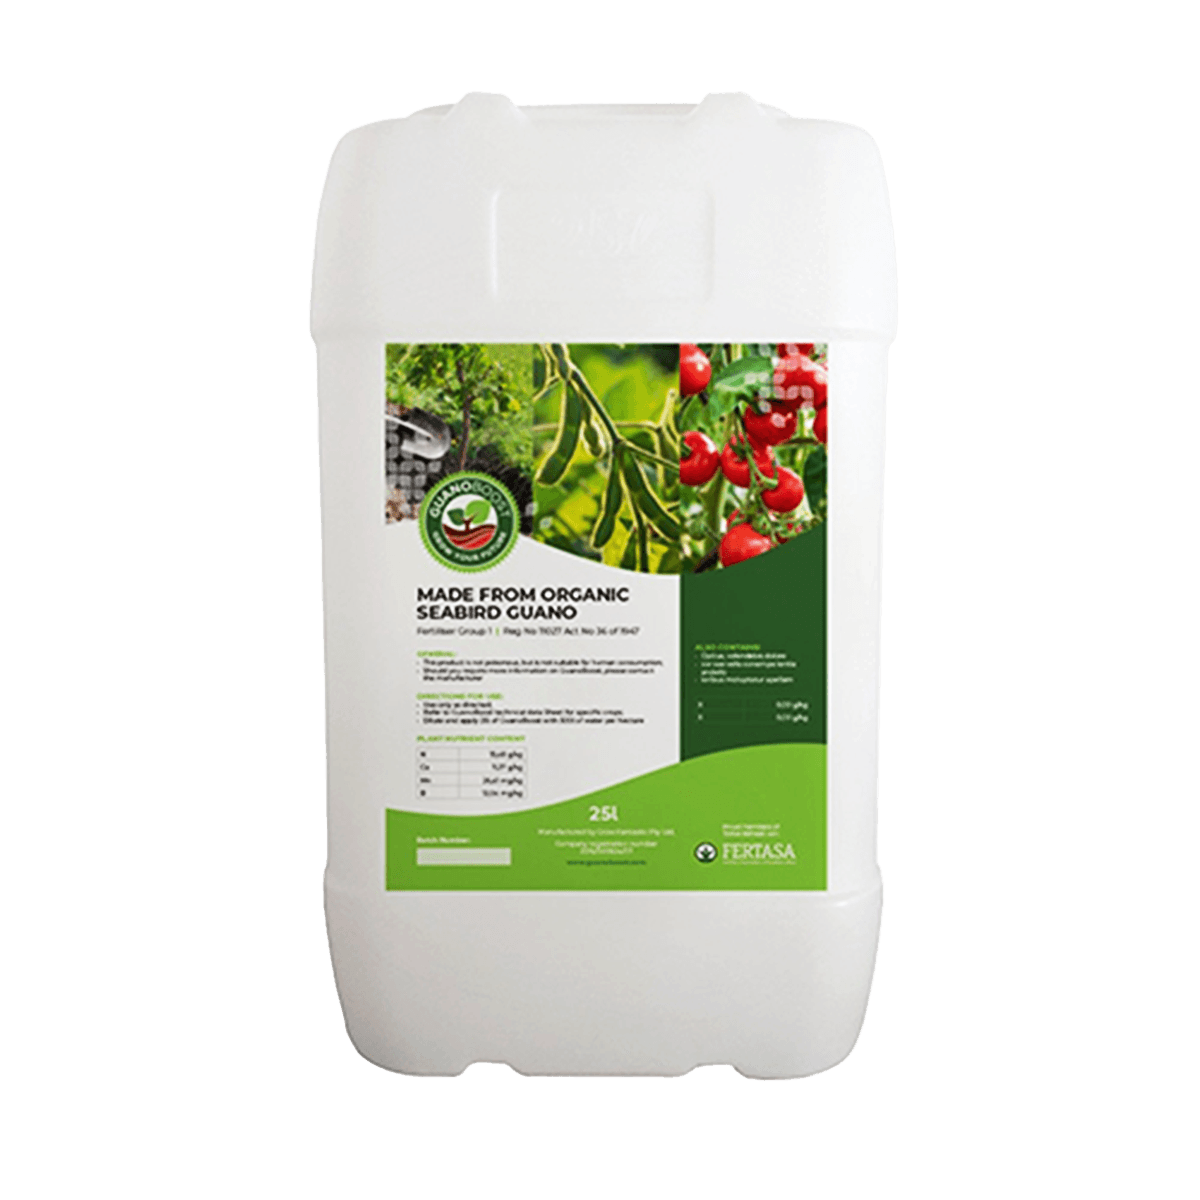 25 Liter Guanoboost Liquid - For Large Gardens or Commercial Farmers - GuanoBoost